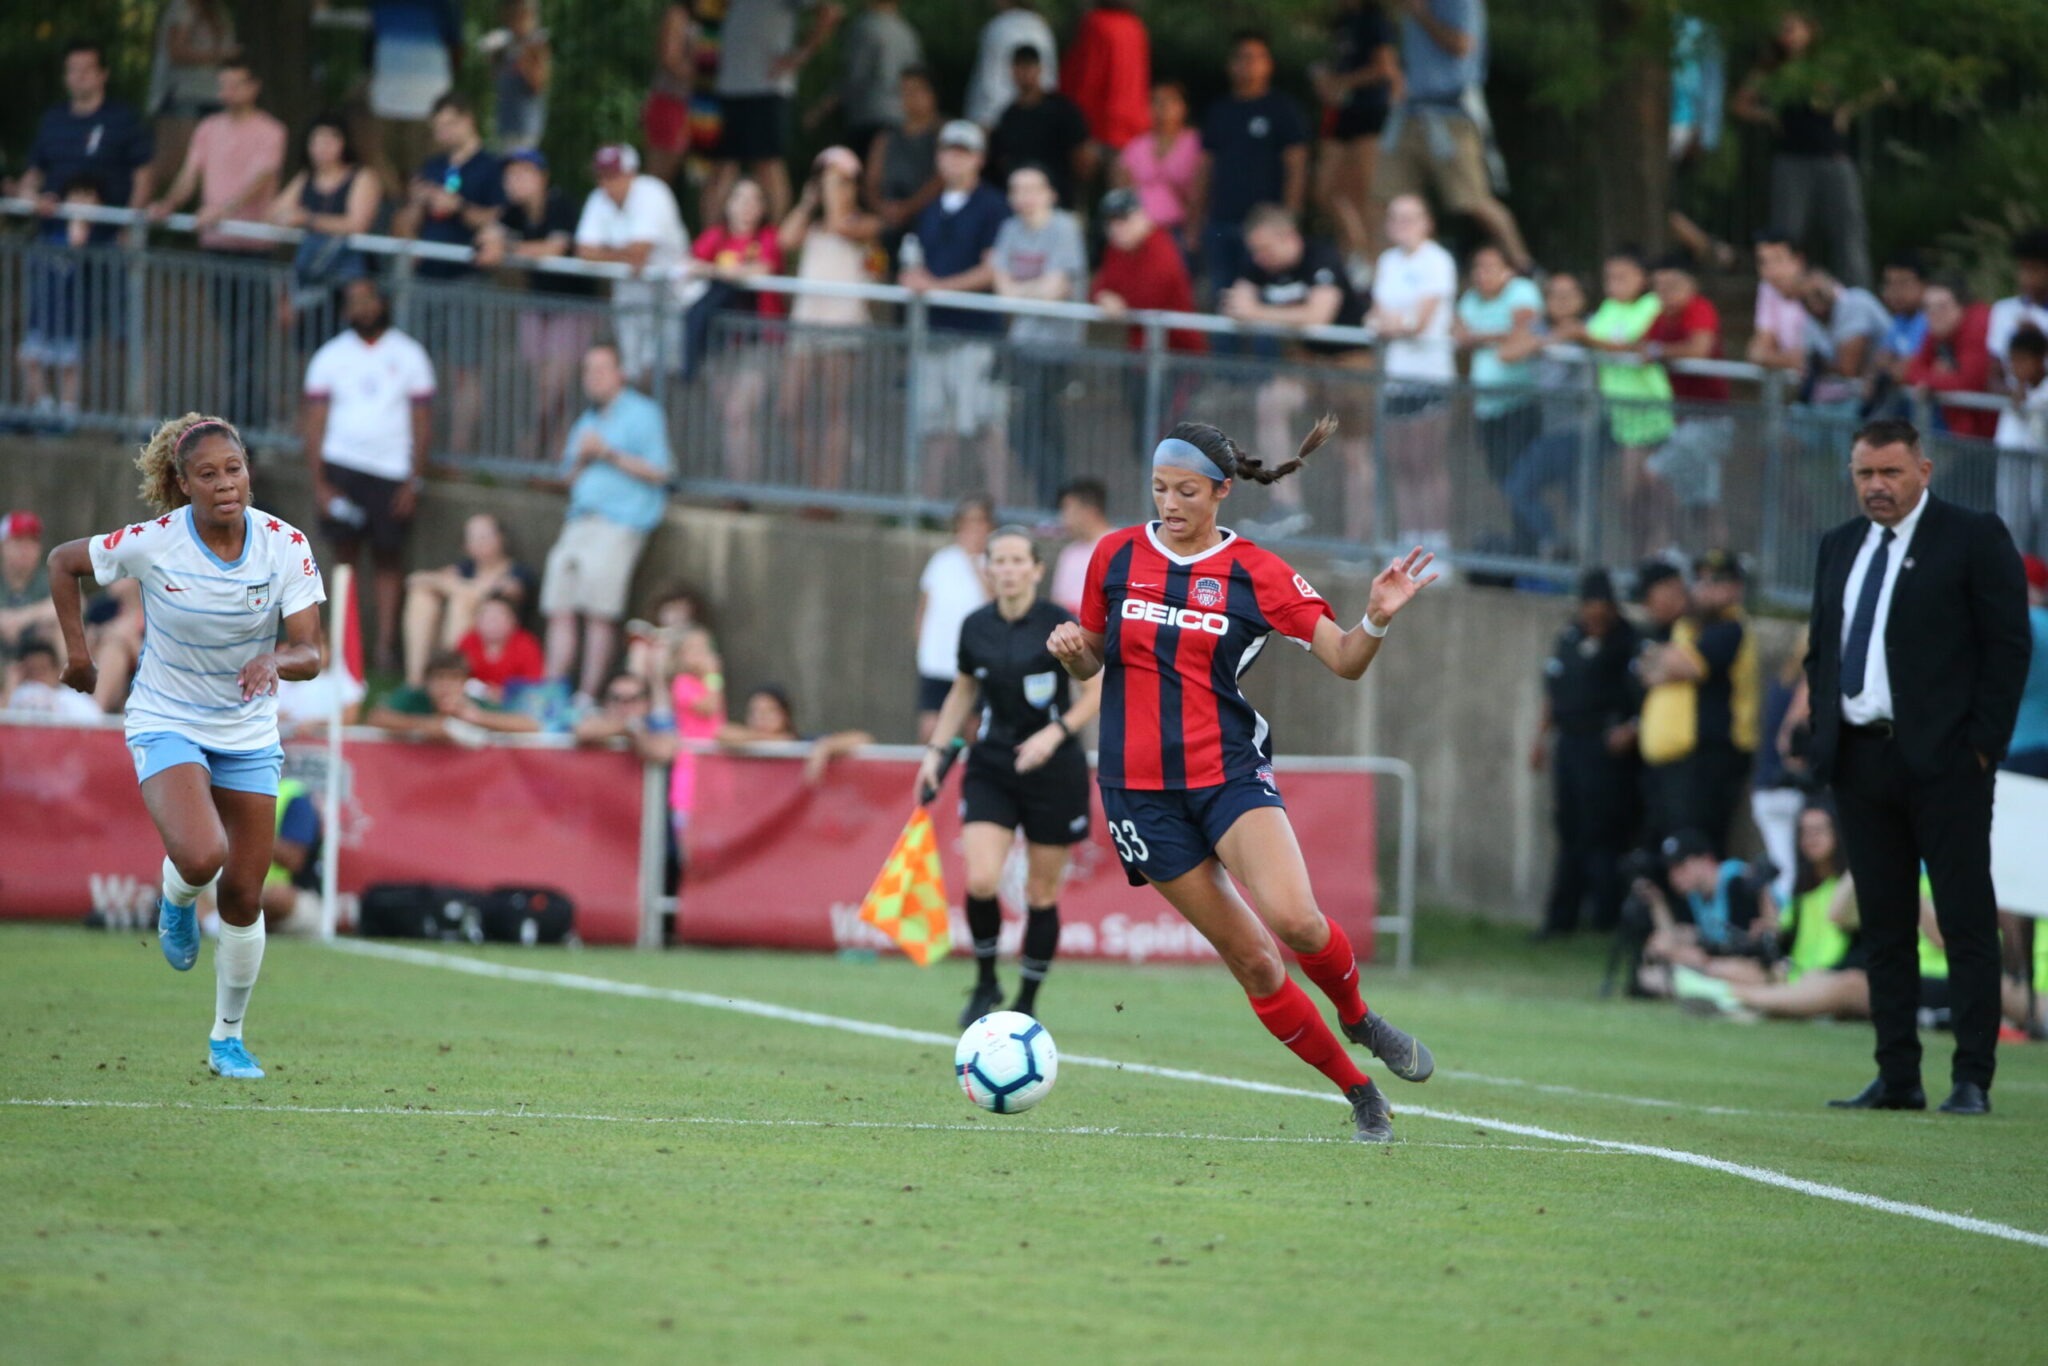 Spirit fans pack the Plex as Washington drops close match to Chicago Featured Image